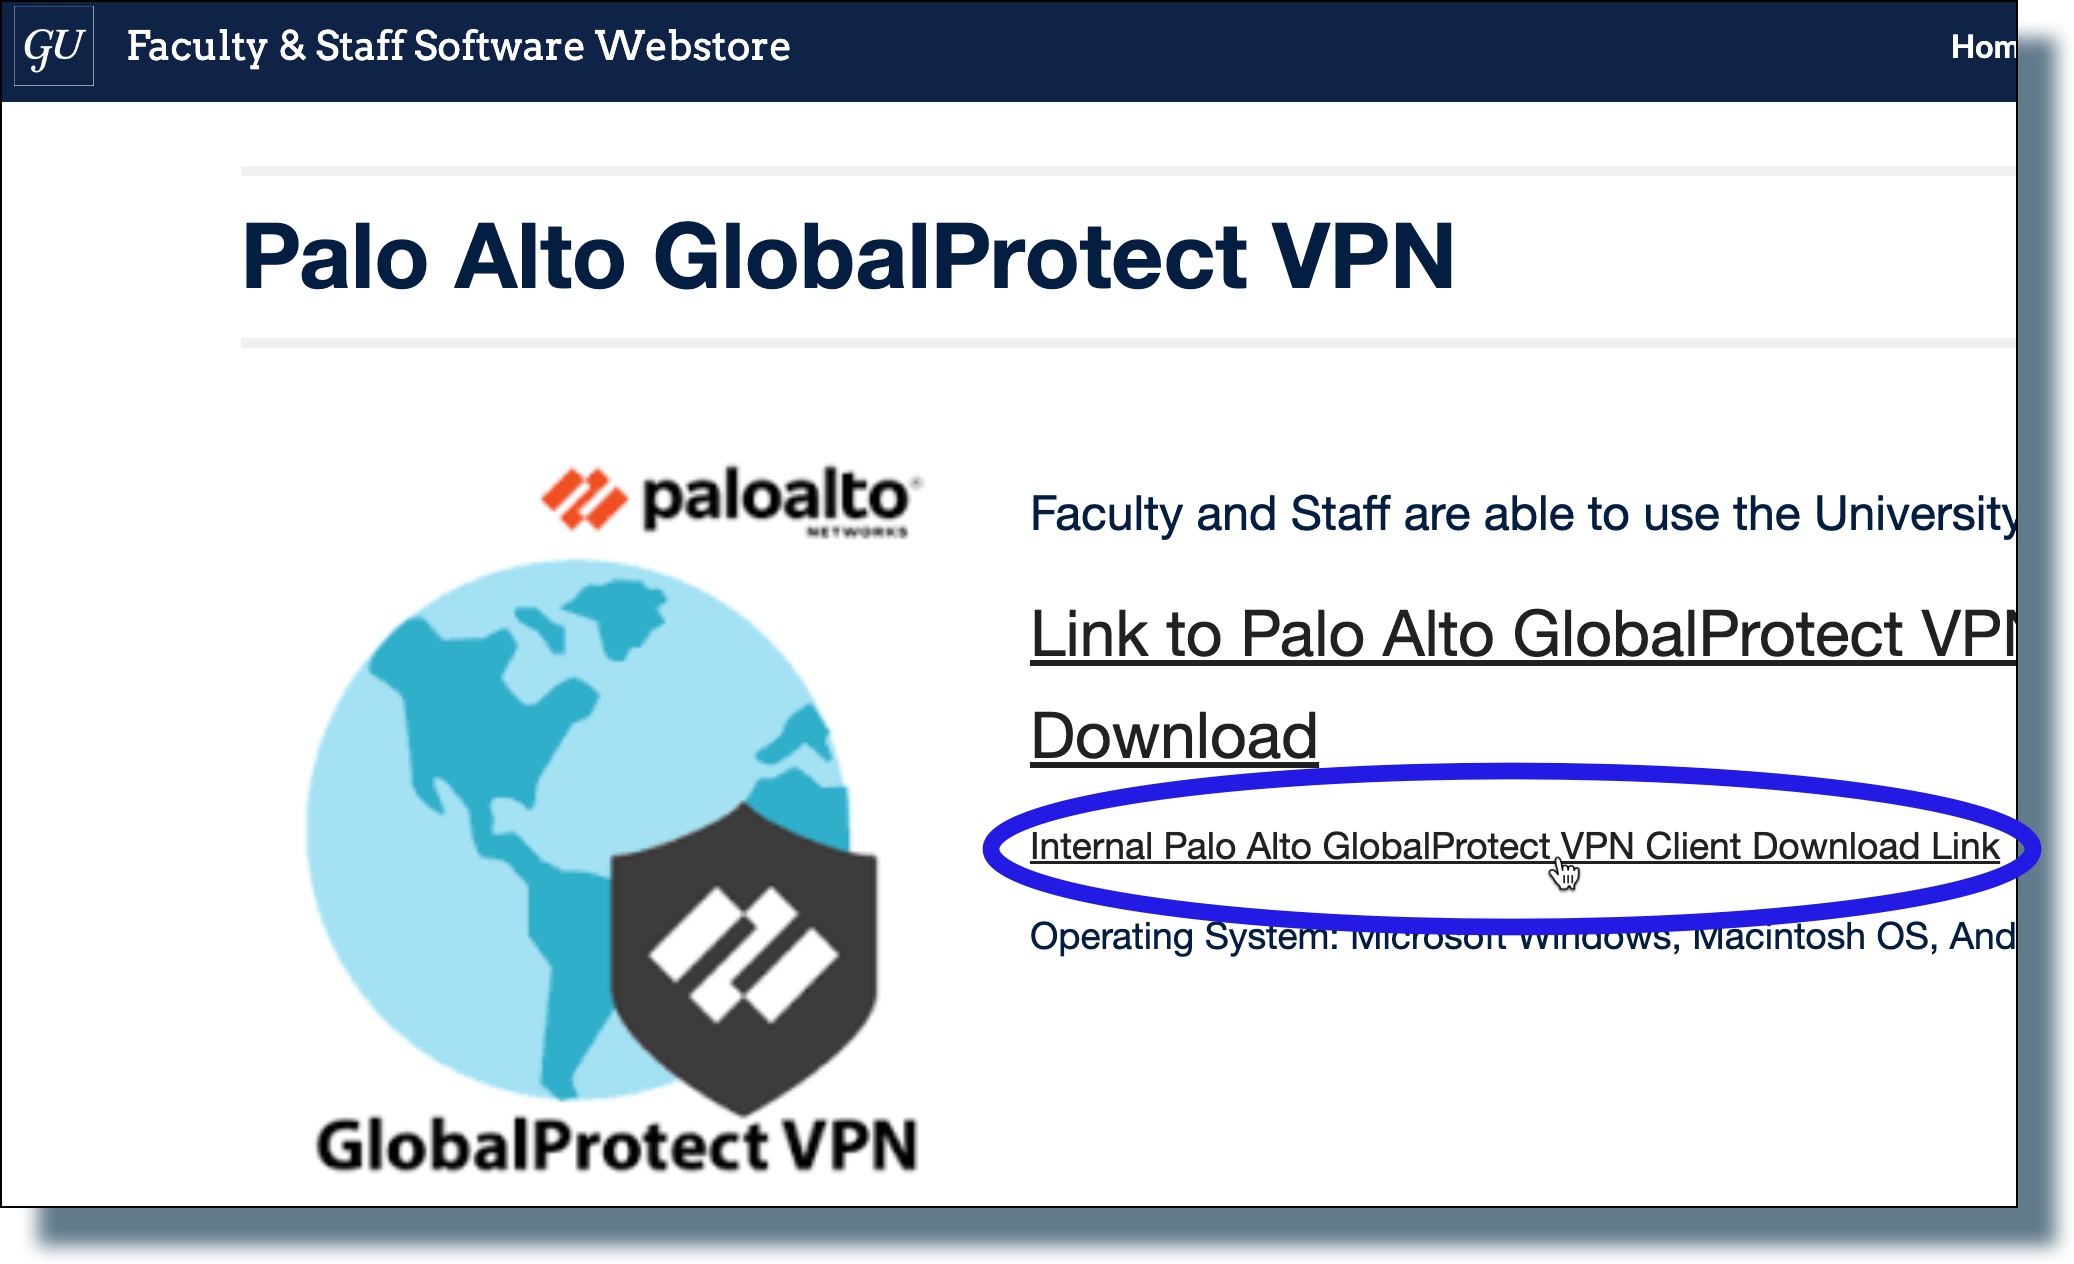 Click on the link "Internal Palo Alto GlobalProtect VPN Client Download link".